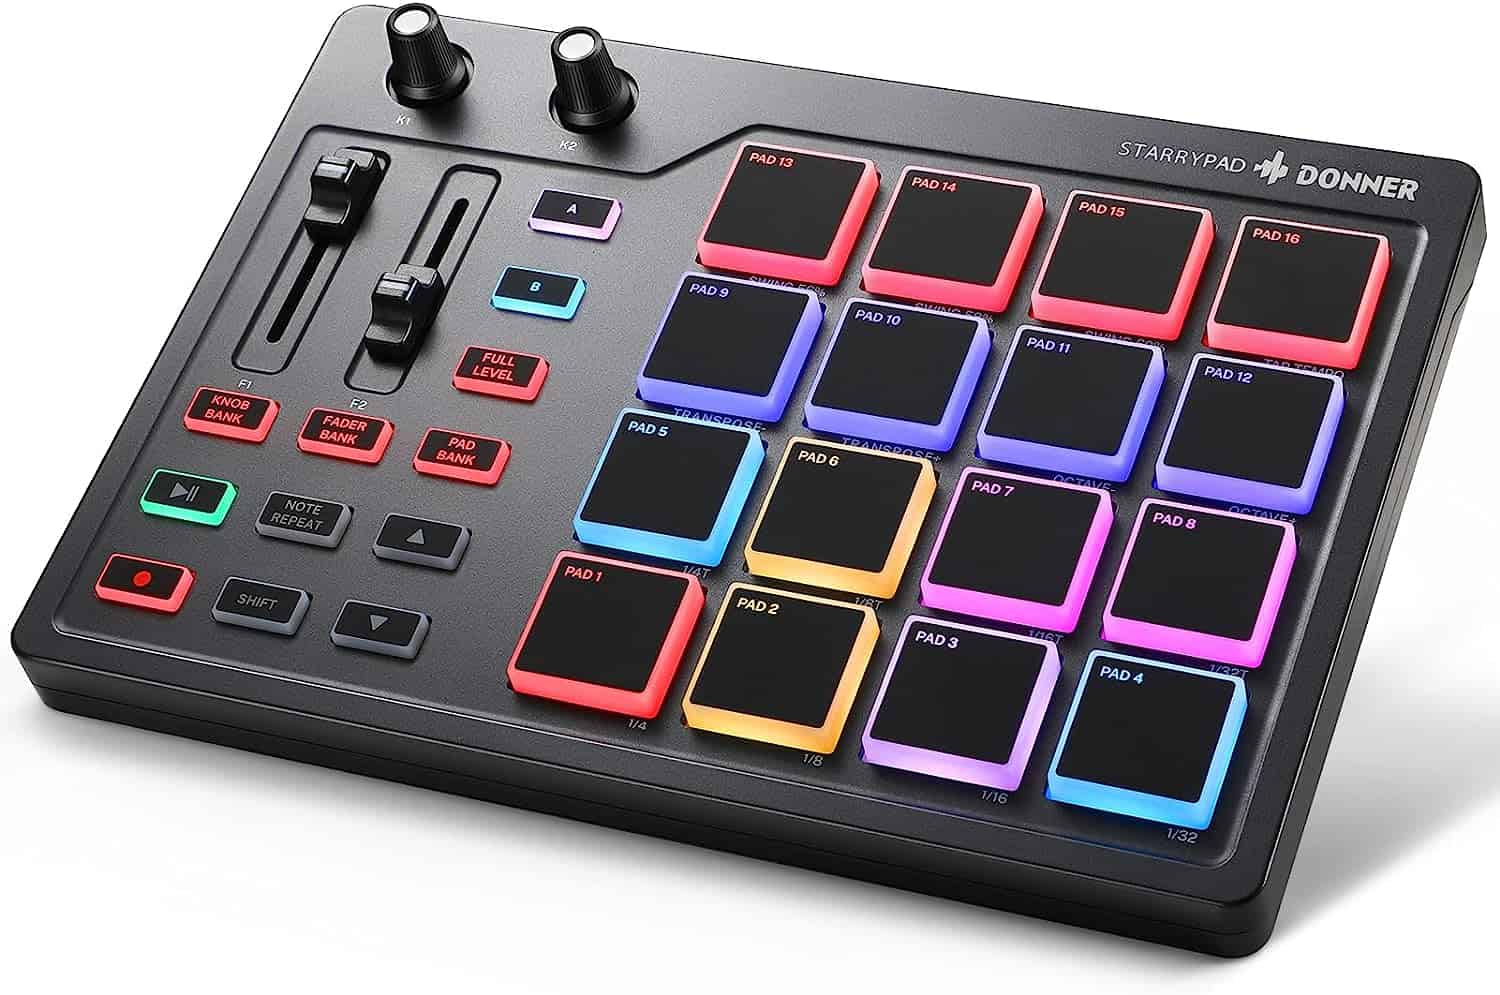 Donner MIDI Pad Beat Maker with 16 Beat Pads, 2 Assignable Fader  Knobs and Music Production Software Included, USB MIDI Pad Controller STARRYPAD with 40 Free Courses